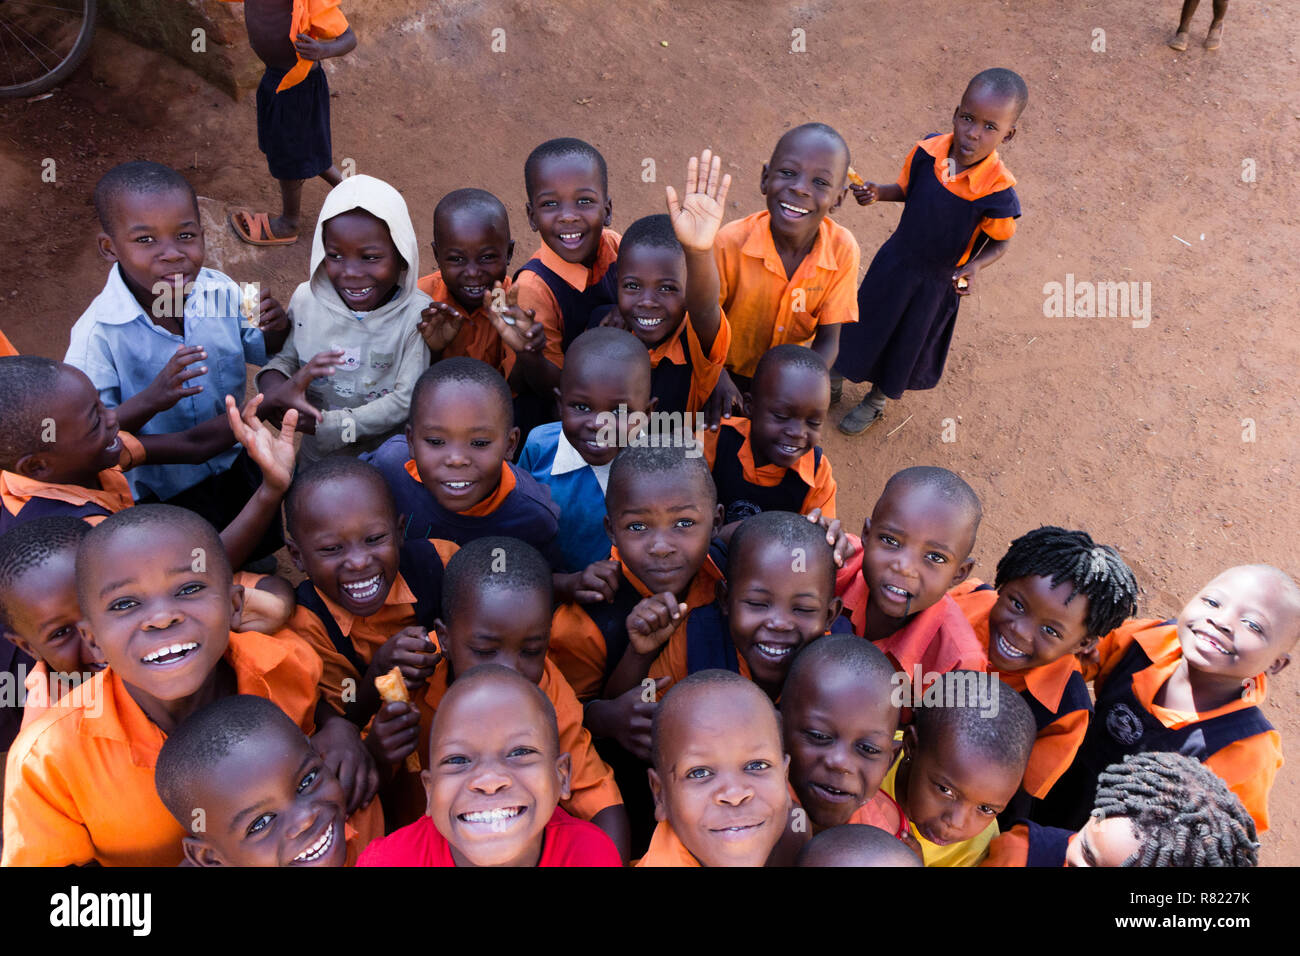 A group of happy primary-school children smiling, laughing and waving. They are dressed in school uniforms. Stock Photo